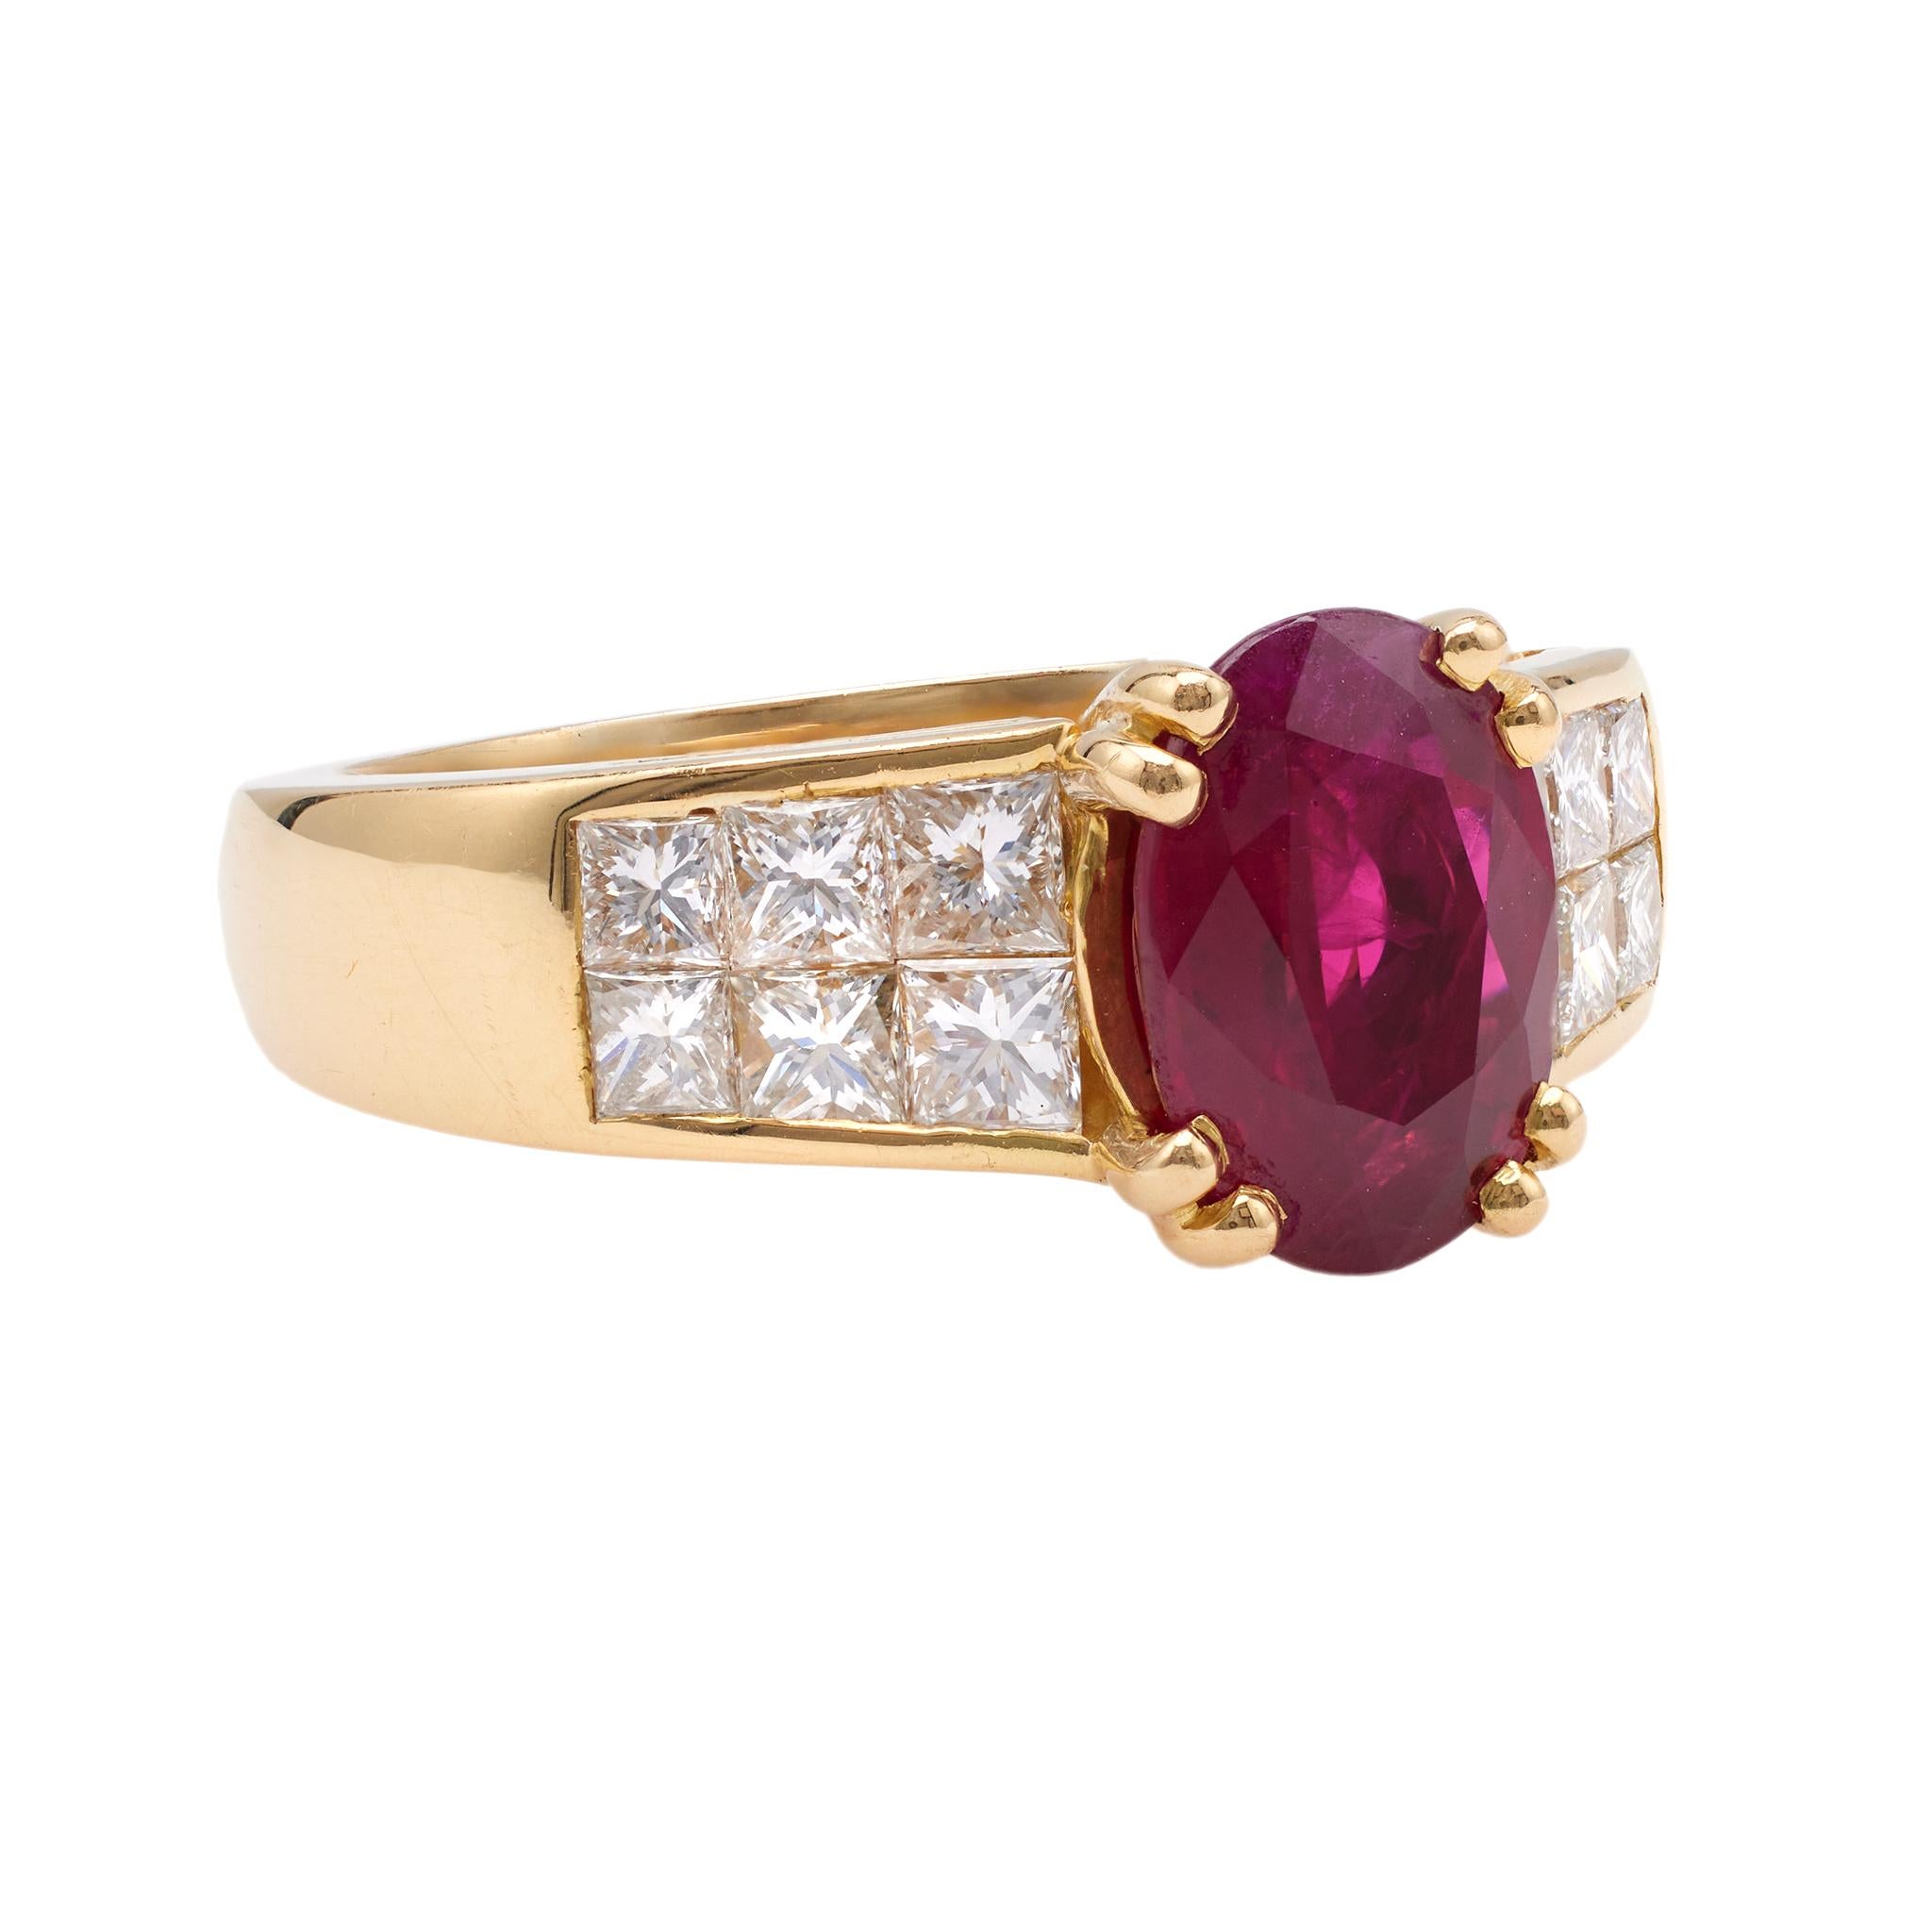 Women's or Men's Vintage French GIA Burma Ruby and Diamond 18k Yellow Gold Ring